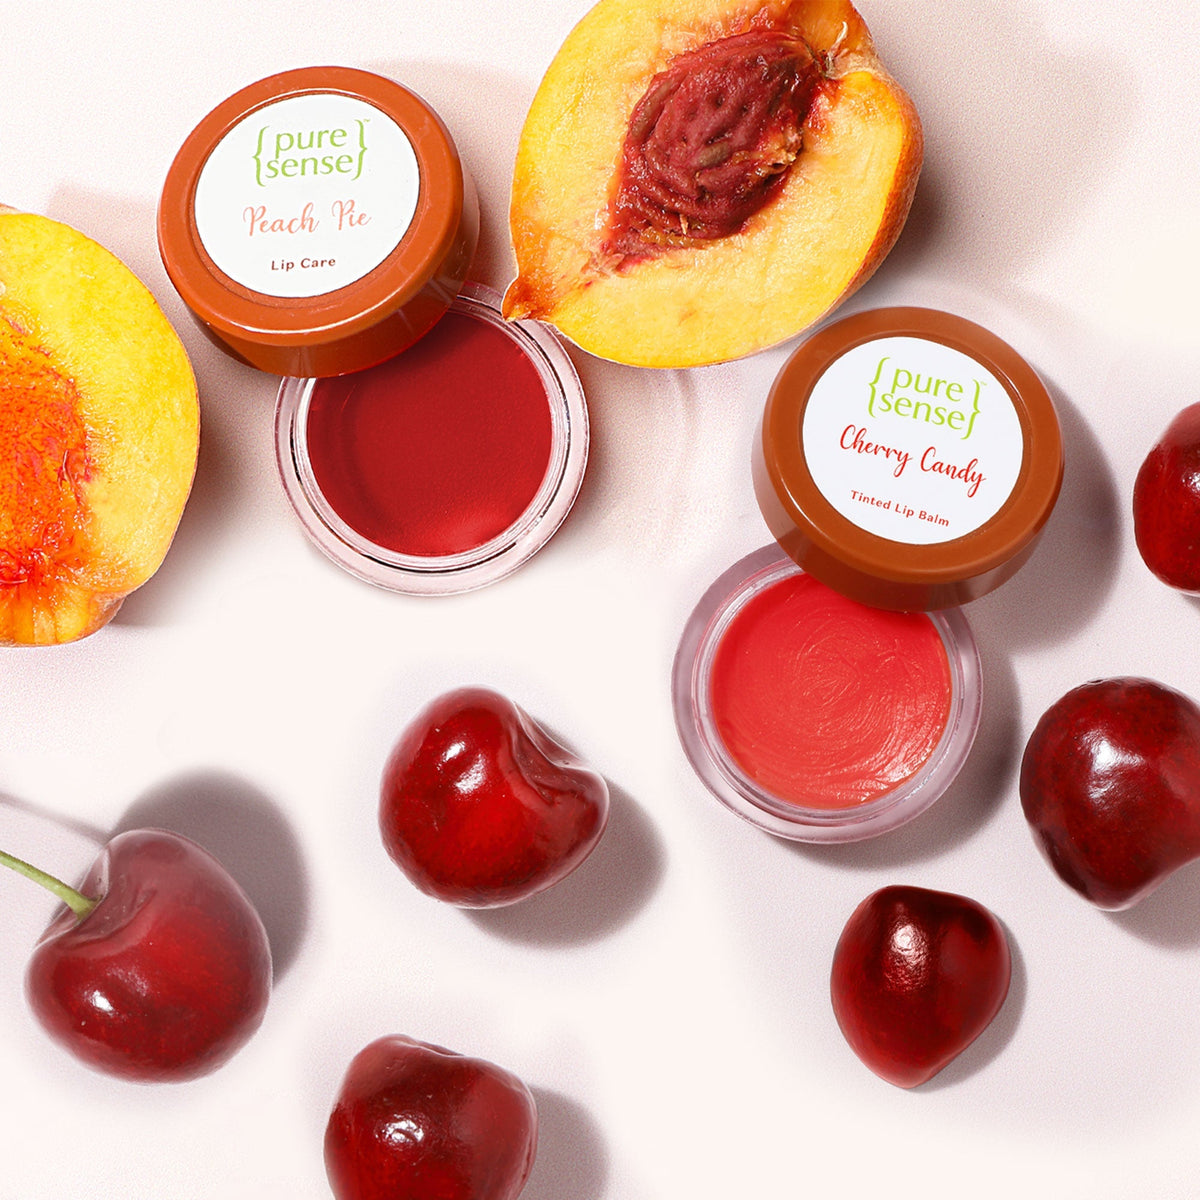 Cherry Candy Tinted Lip Balm 5ml +  Peach Pie Lip Balm 5ml | Pack of 2 | From the makers of Parachute Advansed | 10ml